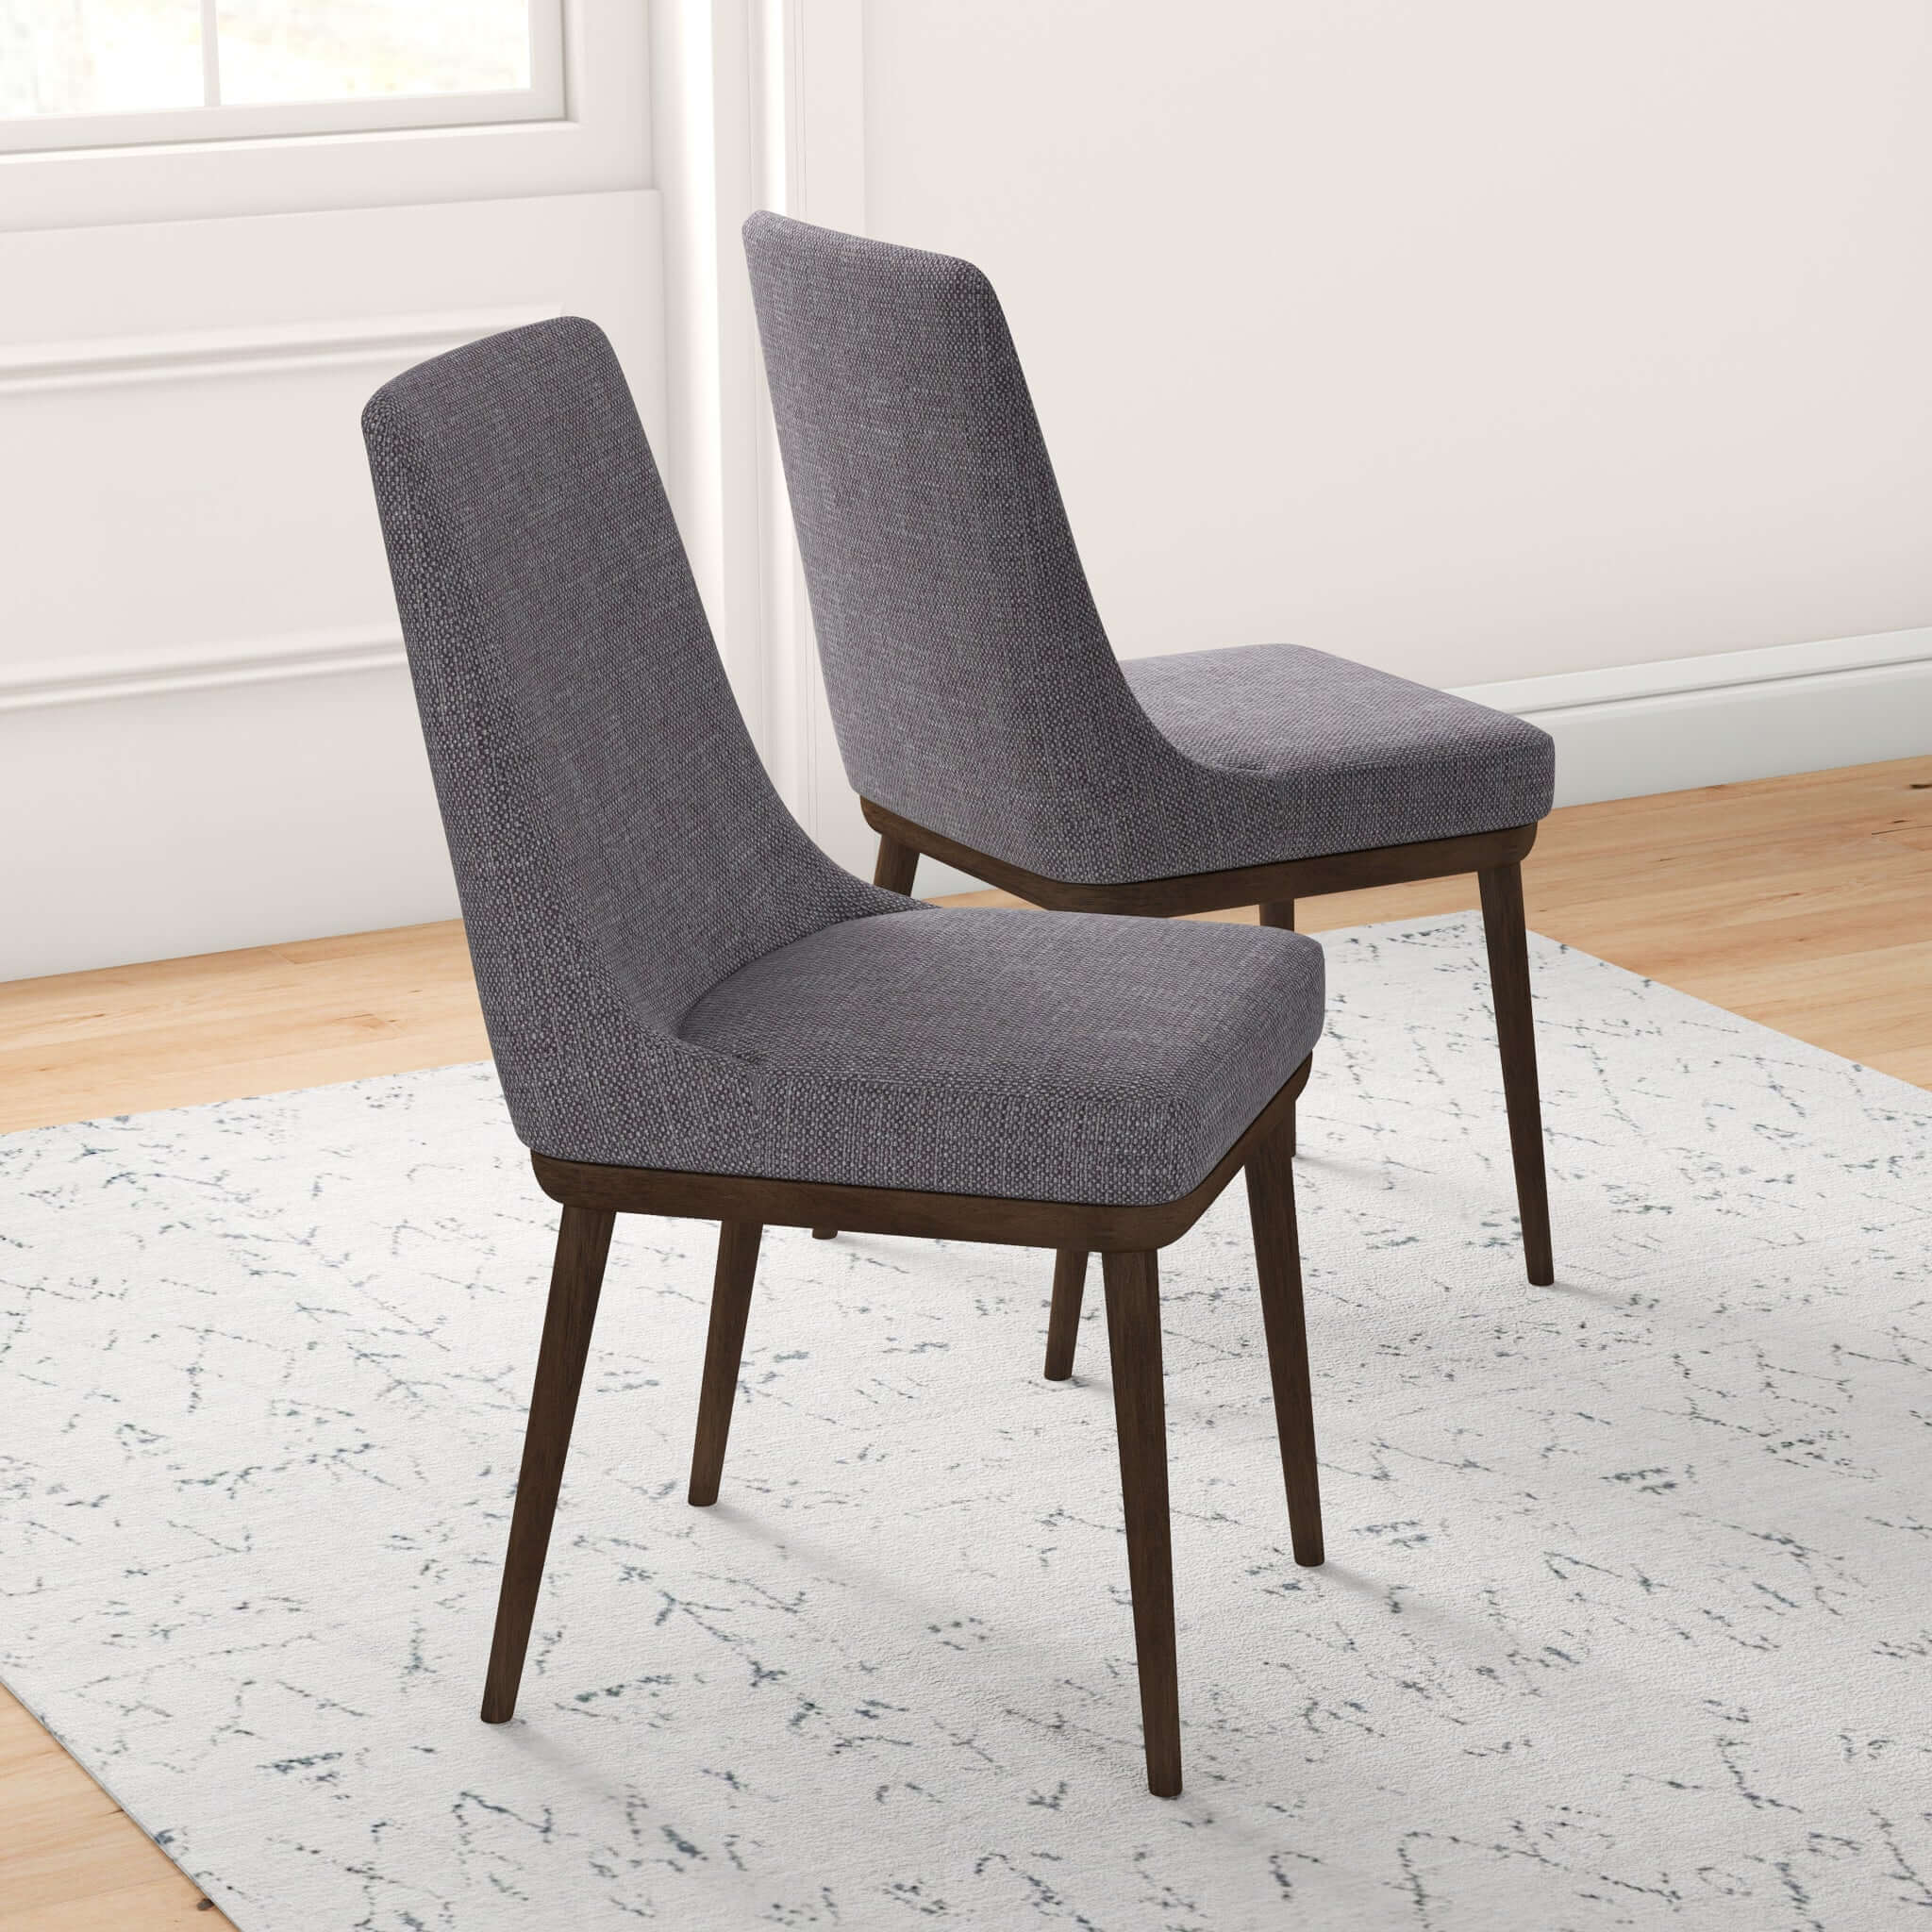 Kate Mid-Century Modern Dining Chair (Set of 2)